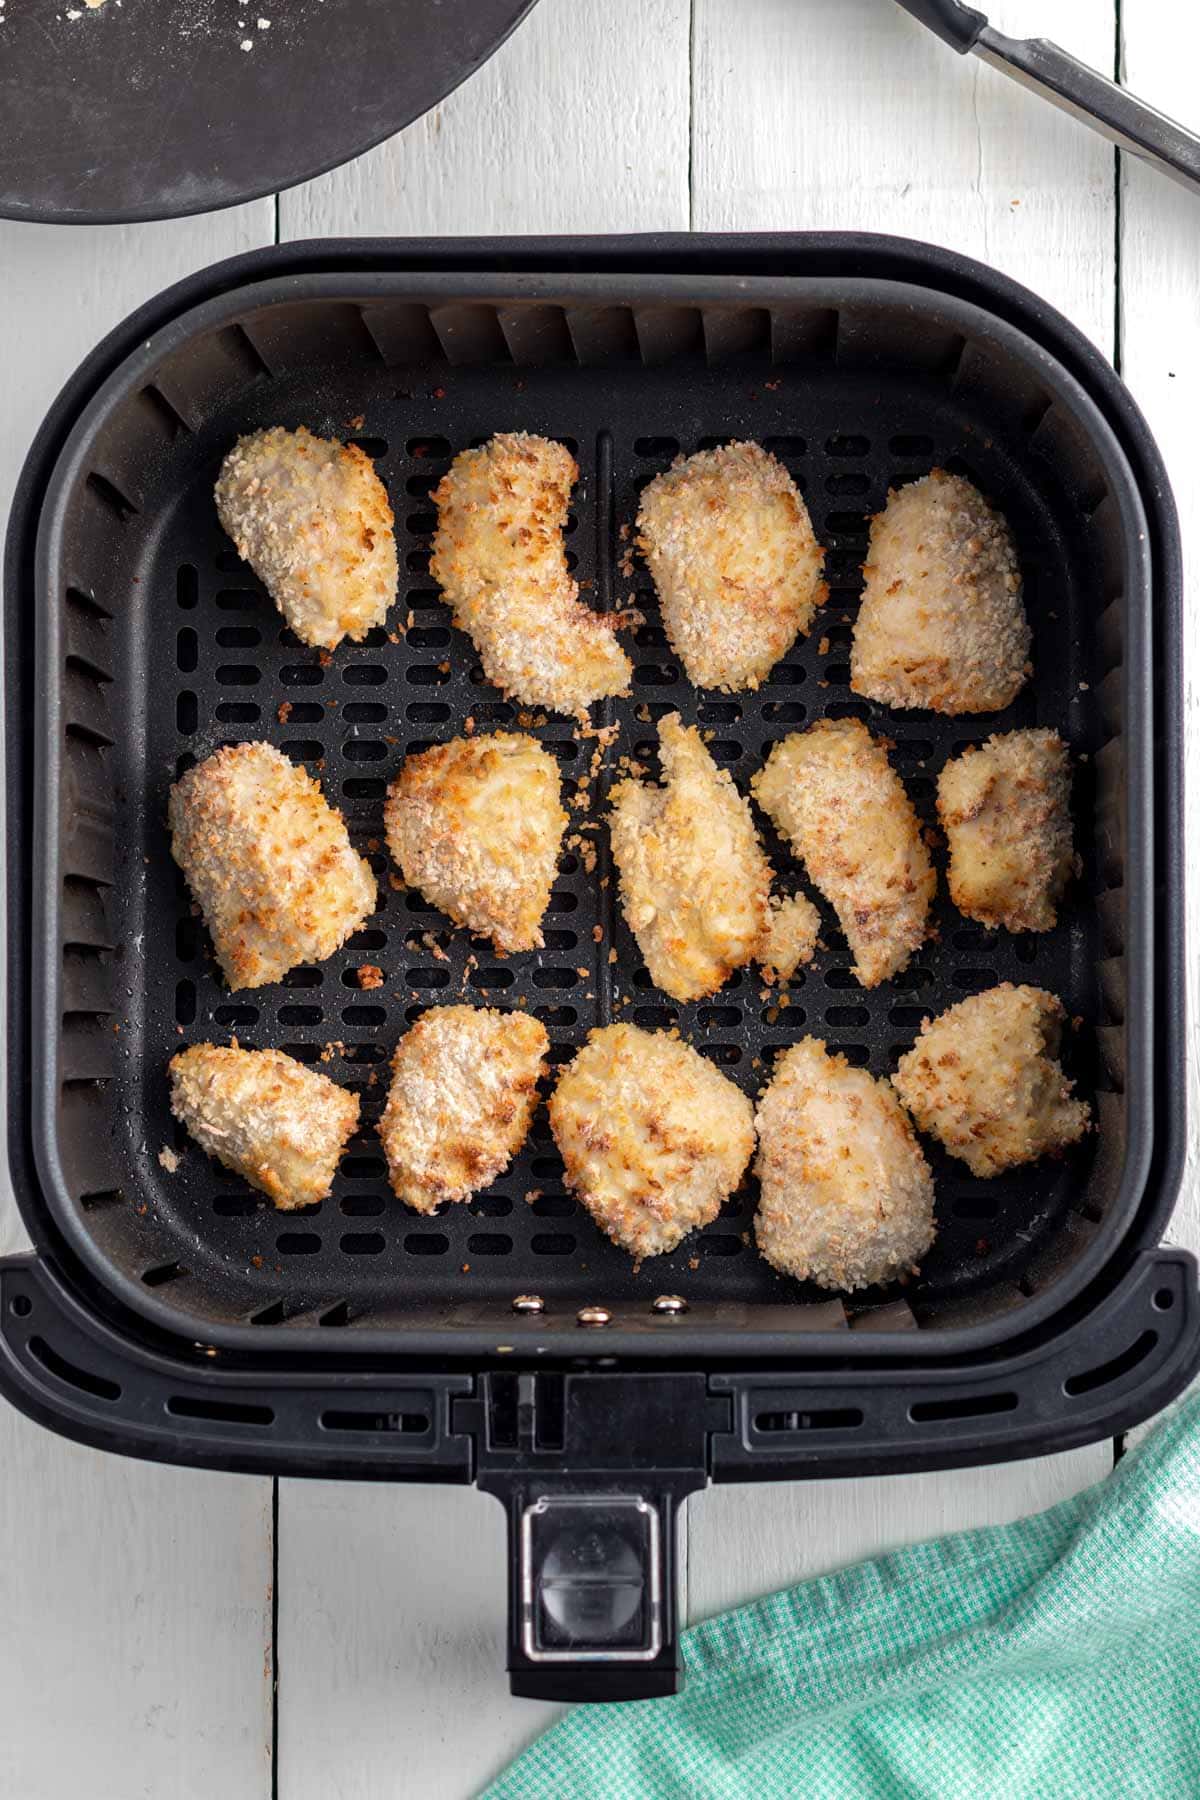 Cook the chicken nugggets in a single layer to keep them crispy.